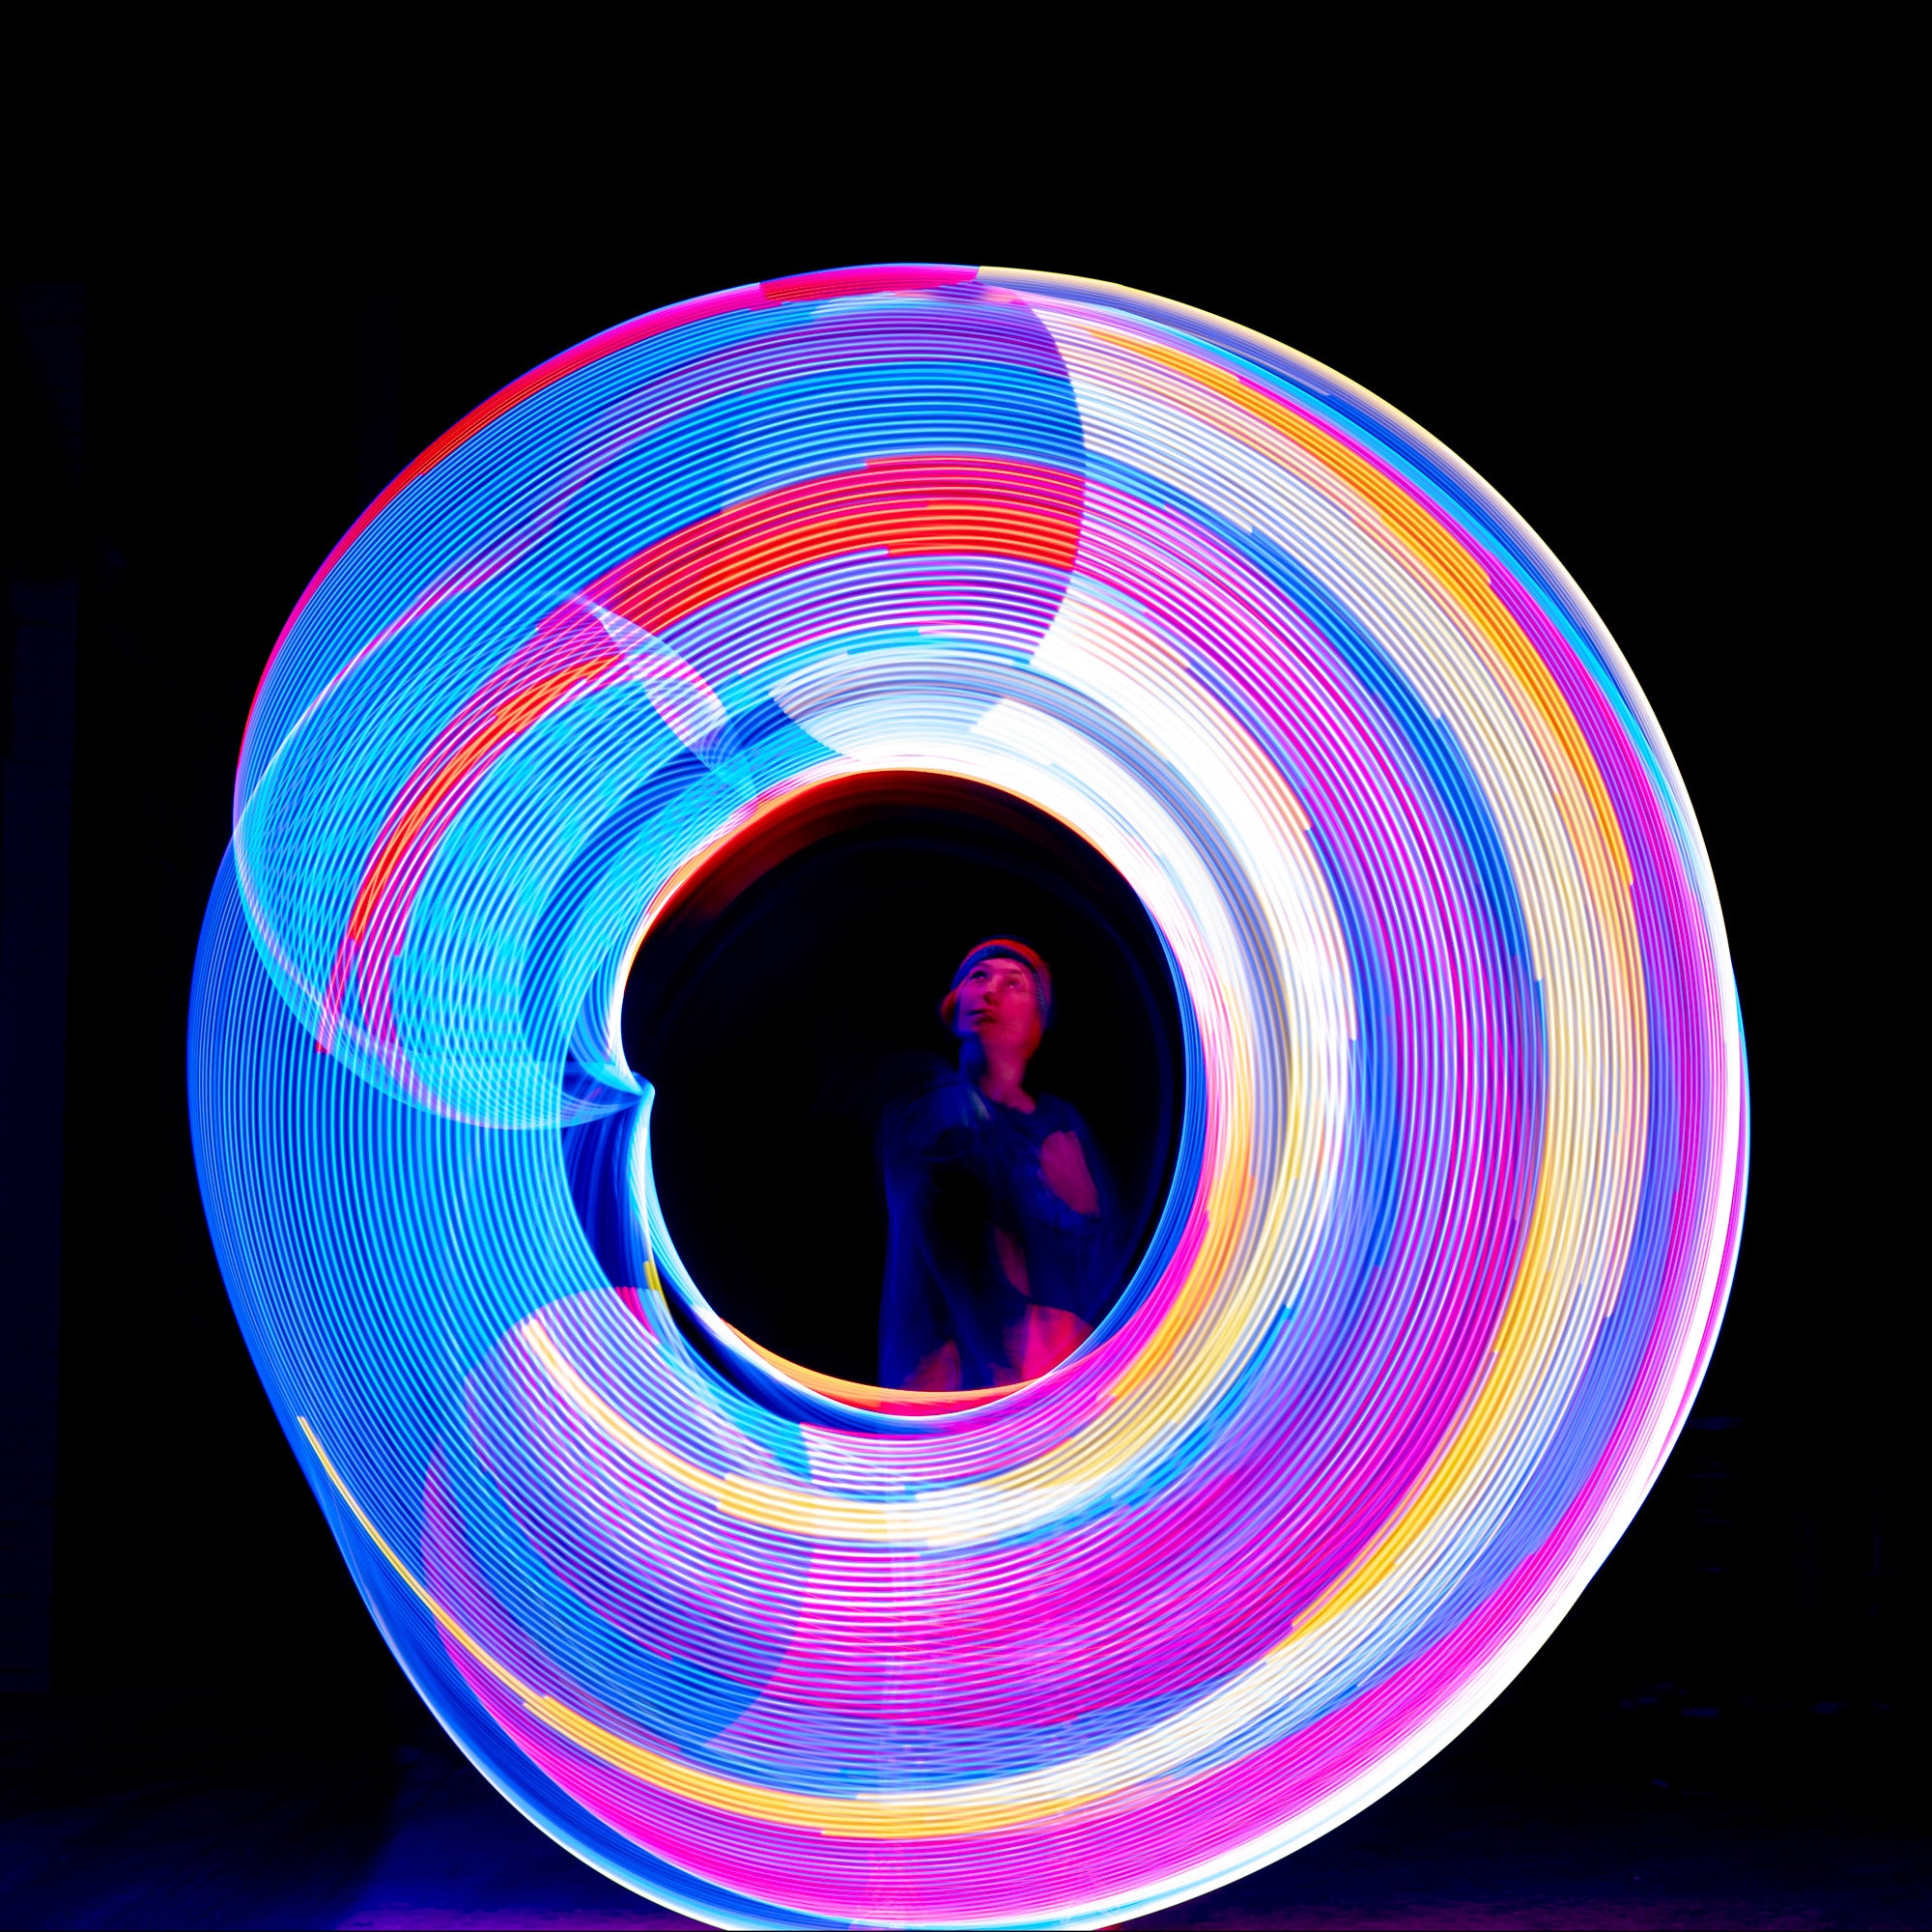 hoop spinning with very bright light trails illuminating the performer